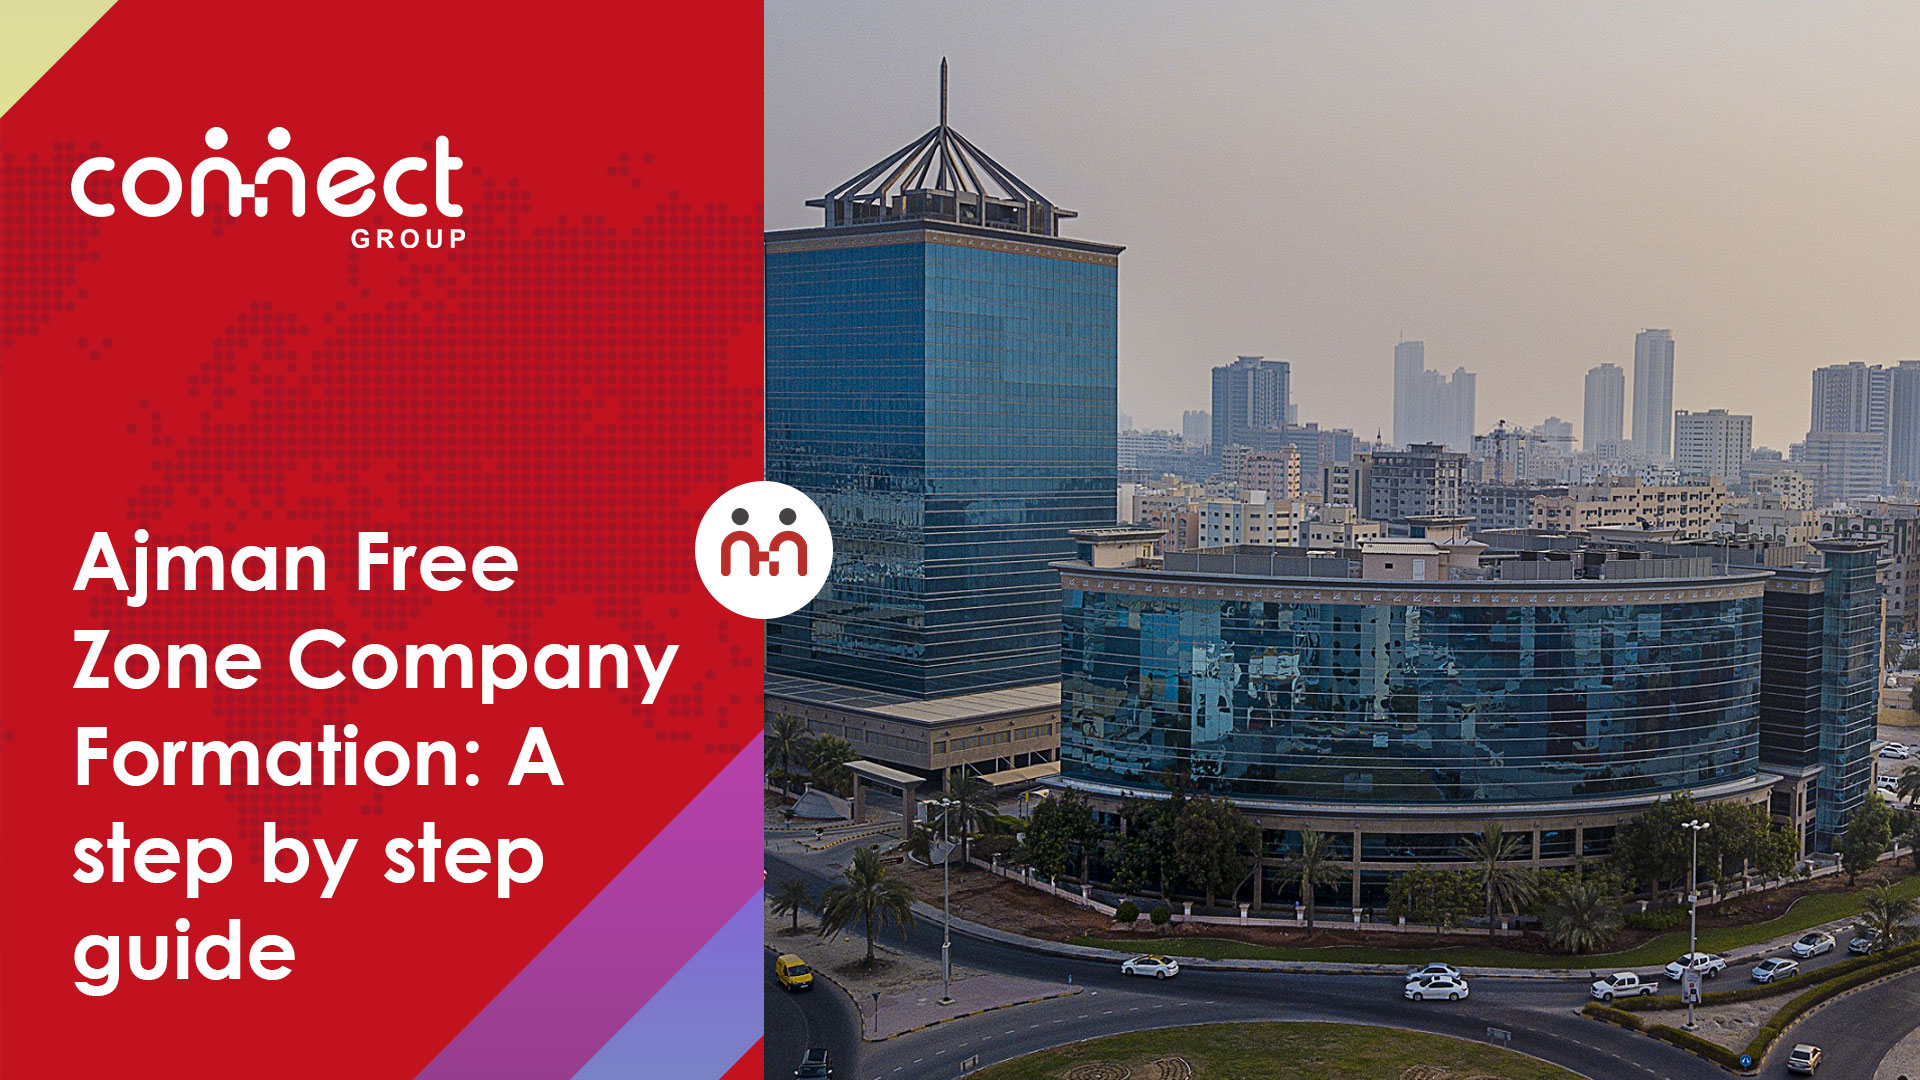 Ajman Free Zone Company Formation: A step by step guide